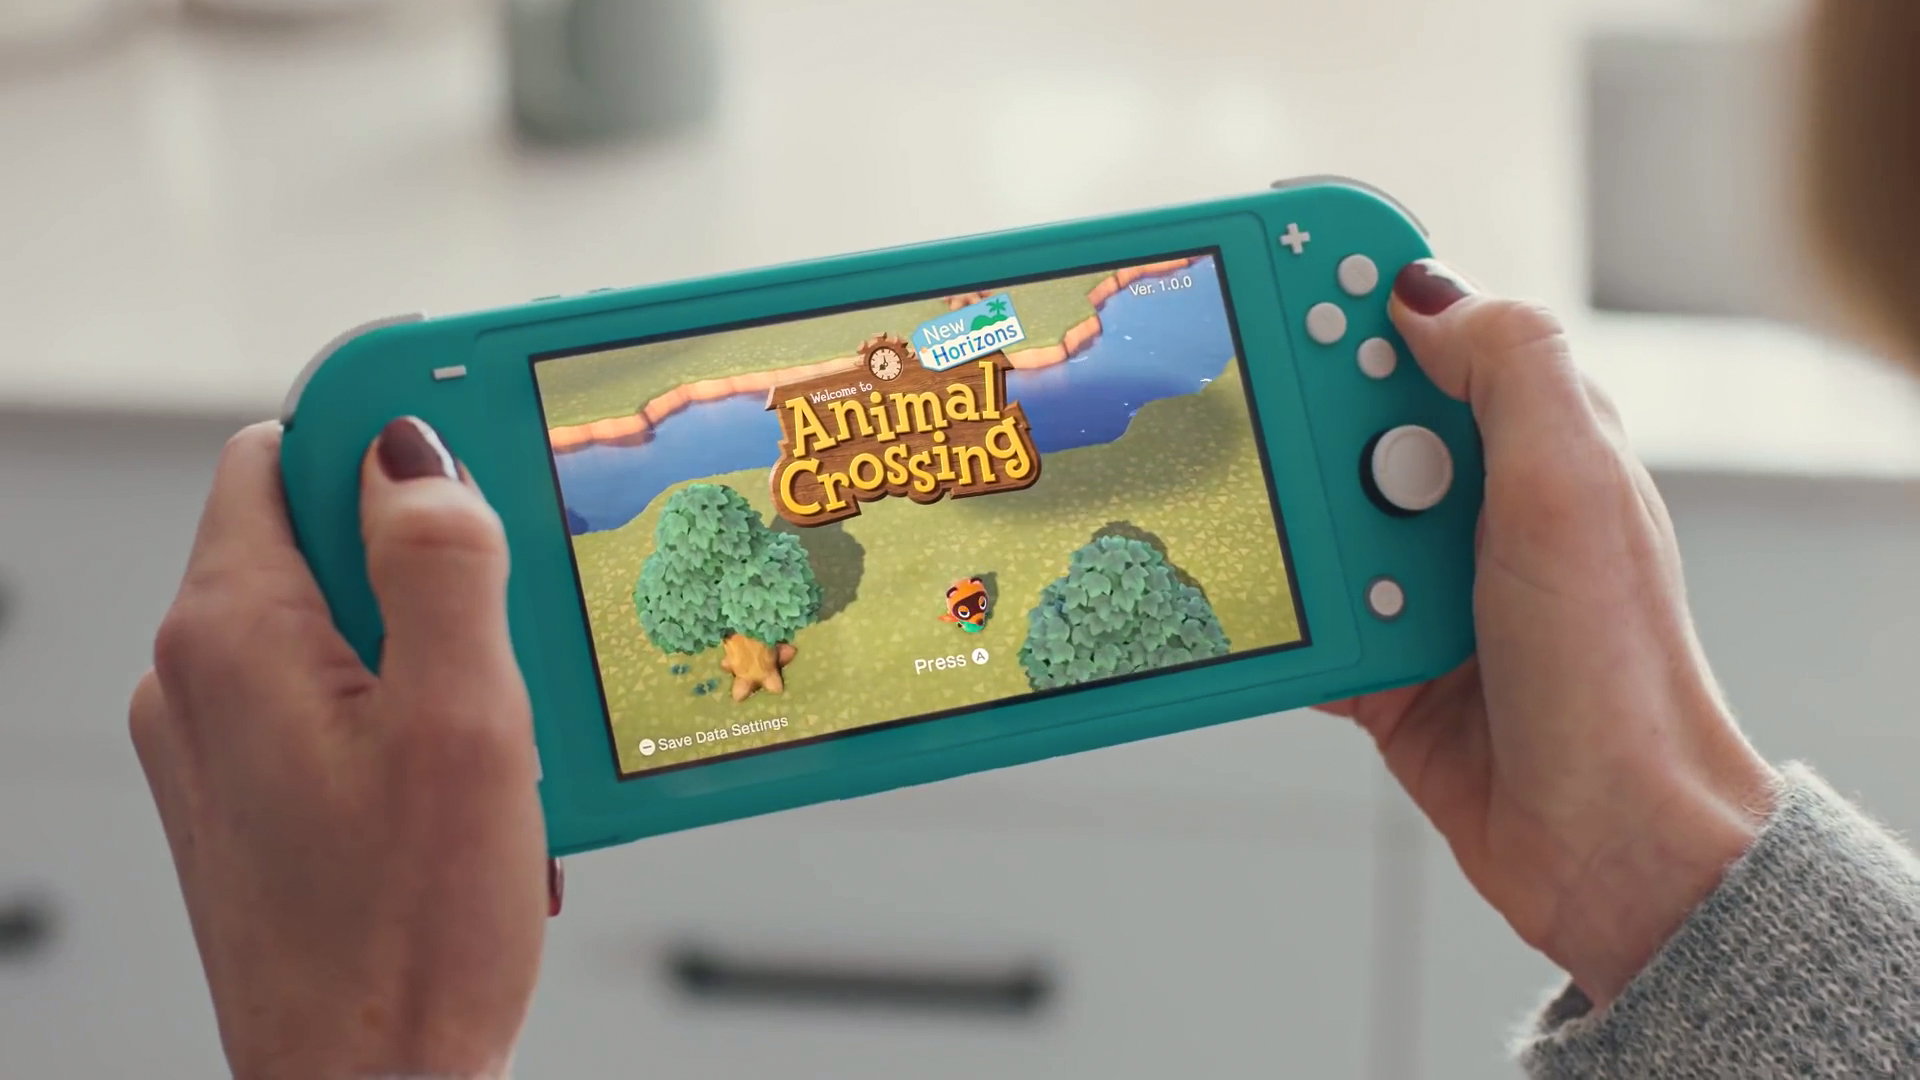 Nintendo is killing Animal Crossing: New Horizons by stopping